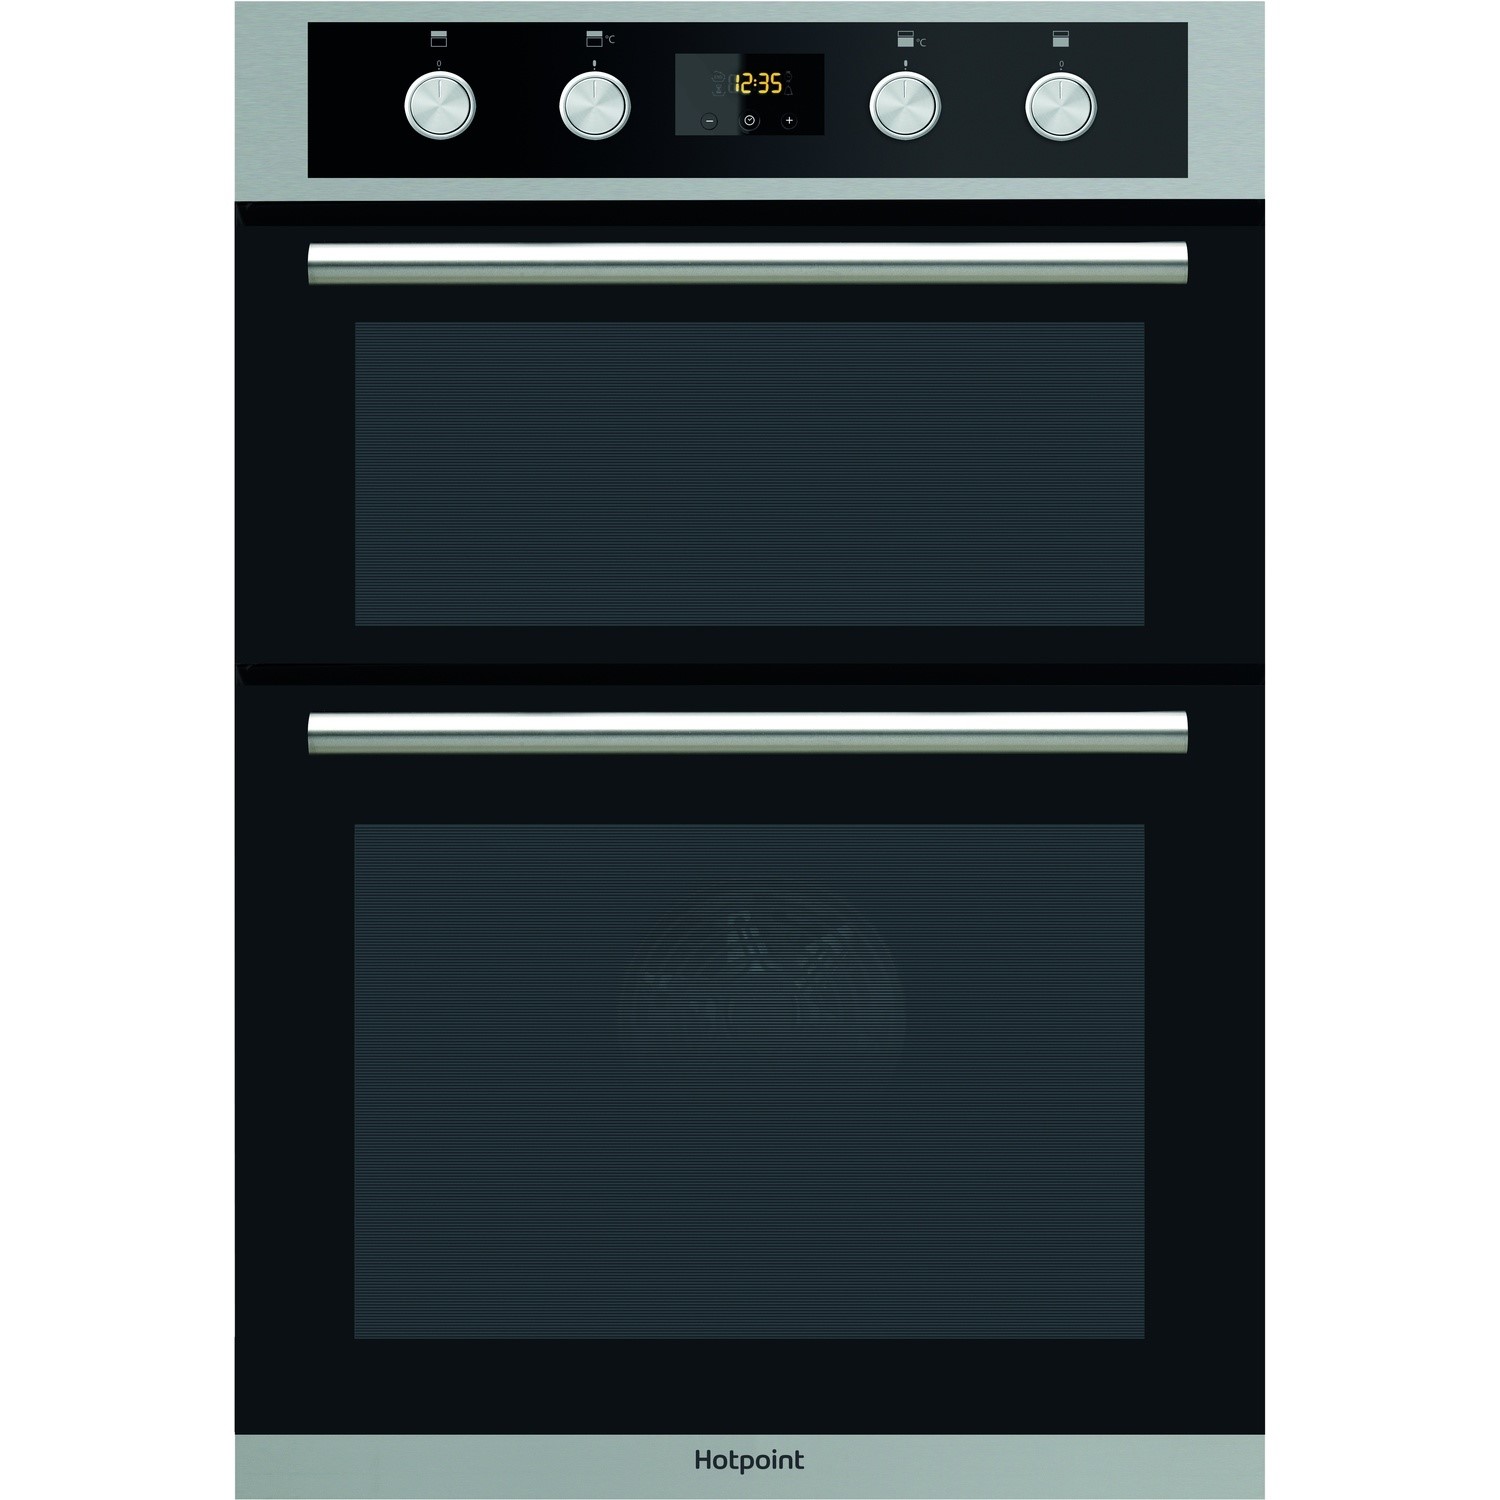 Refurbished Hotpoint DD2844CIX 60cm Double Built In Electric Oven with Catalytic Liners Stainless St